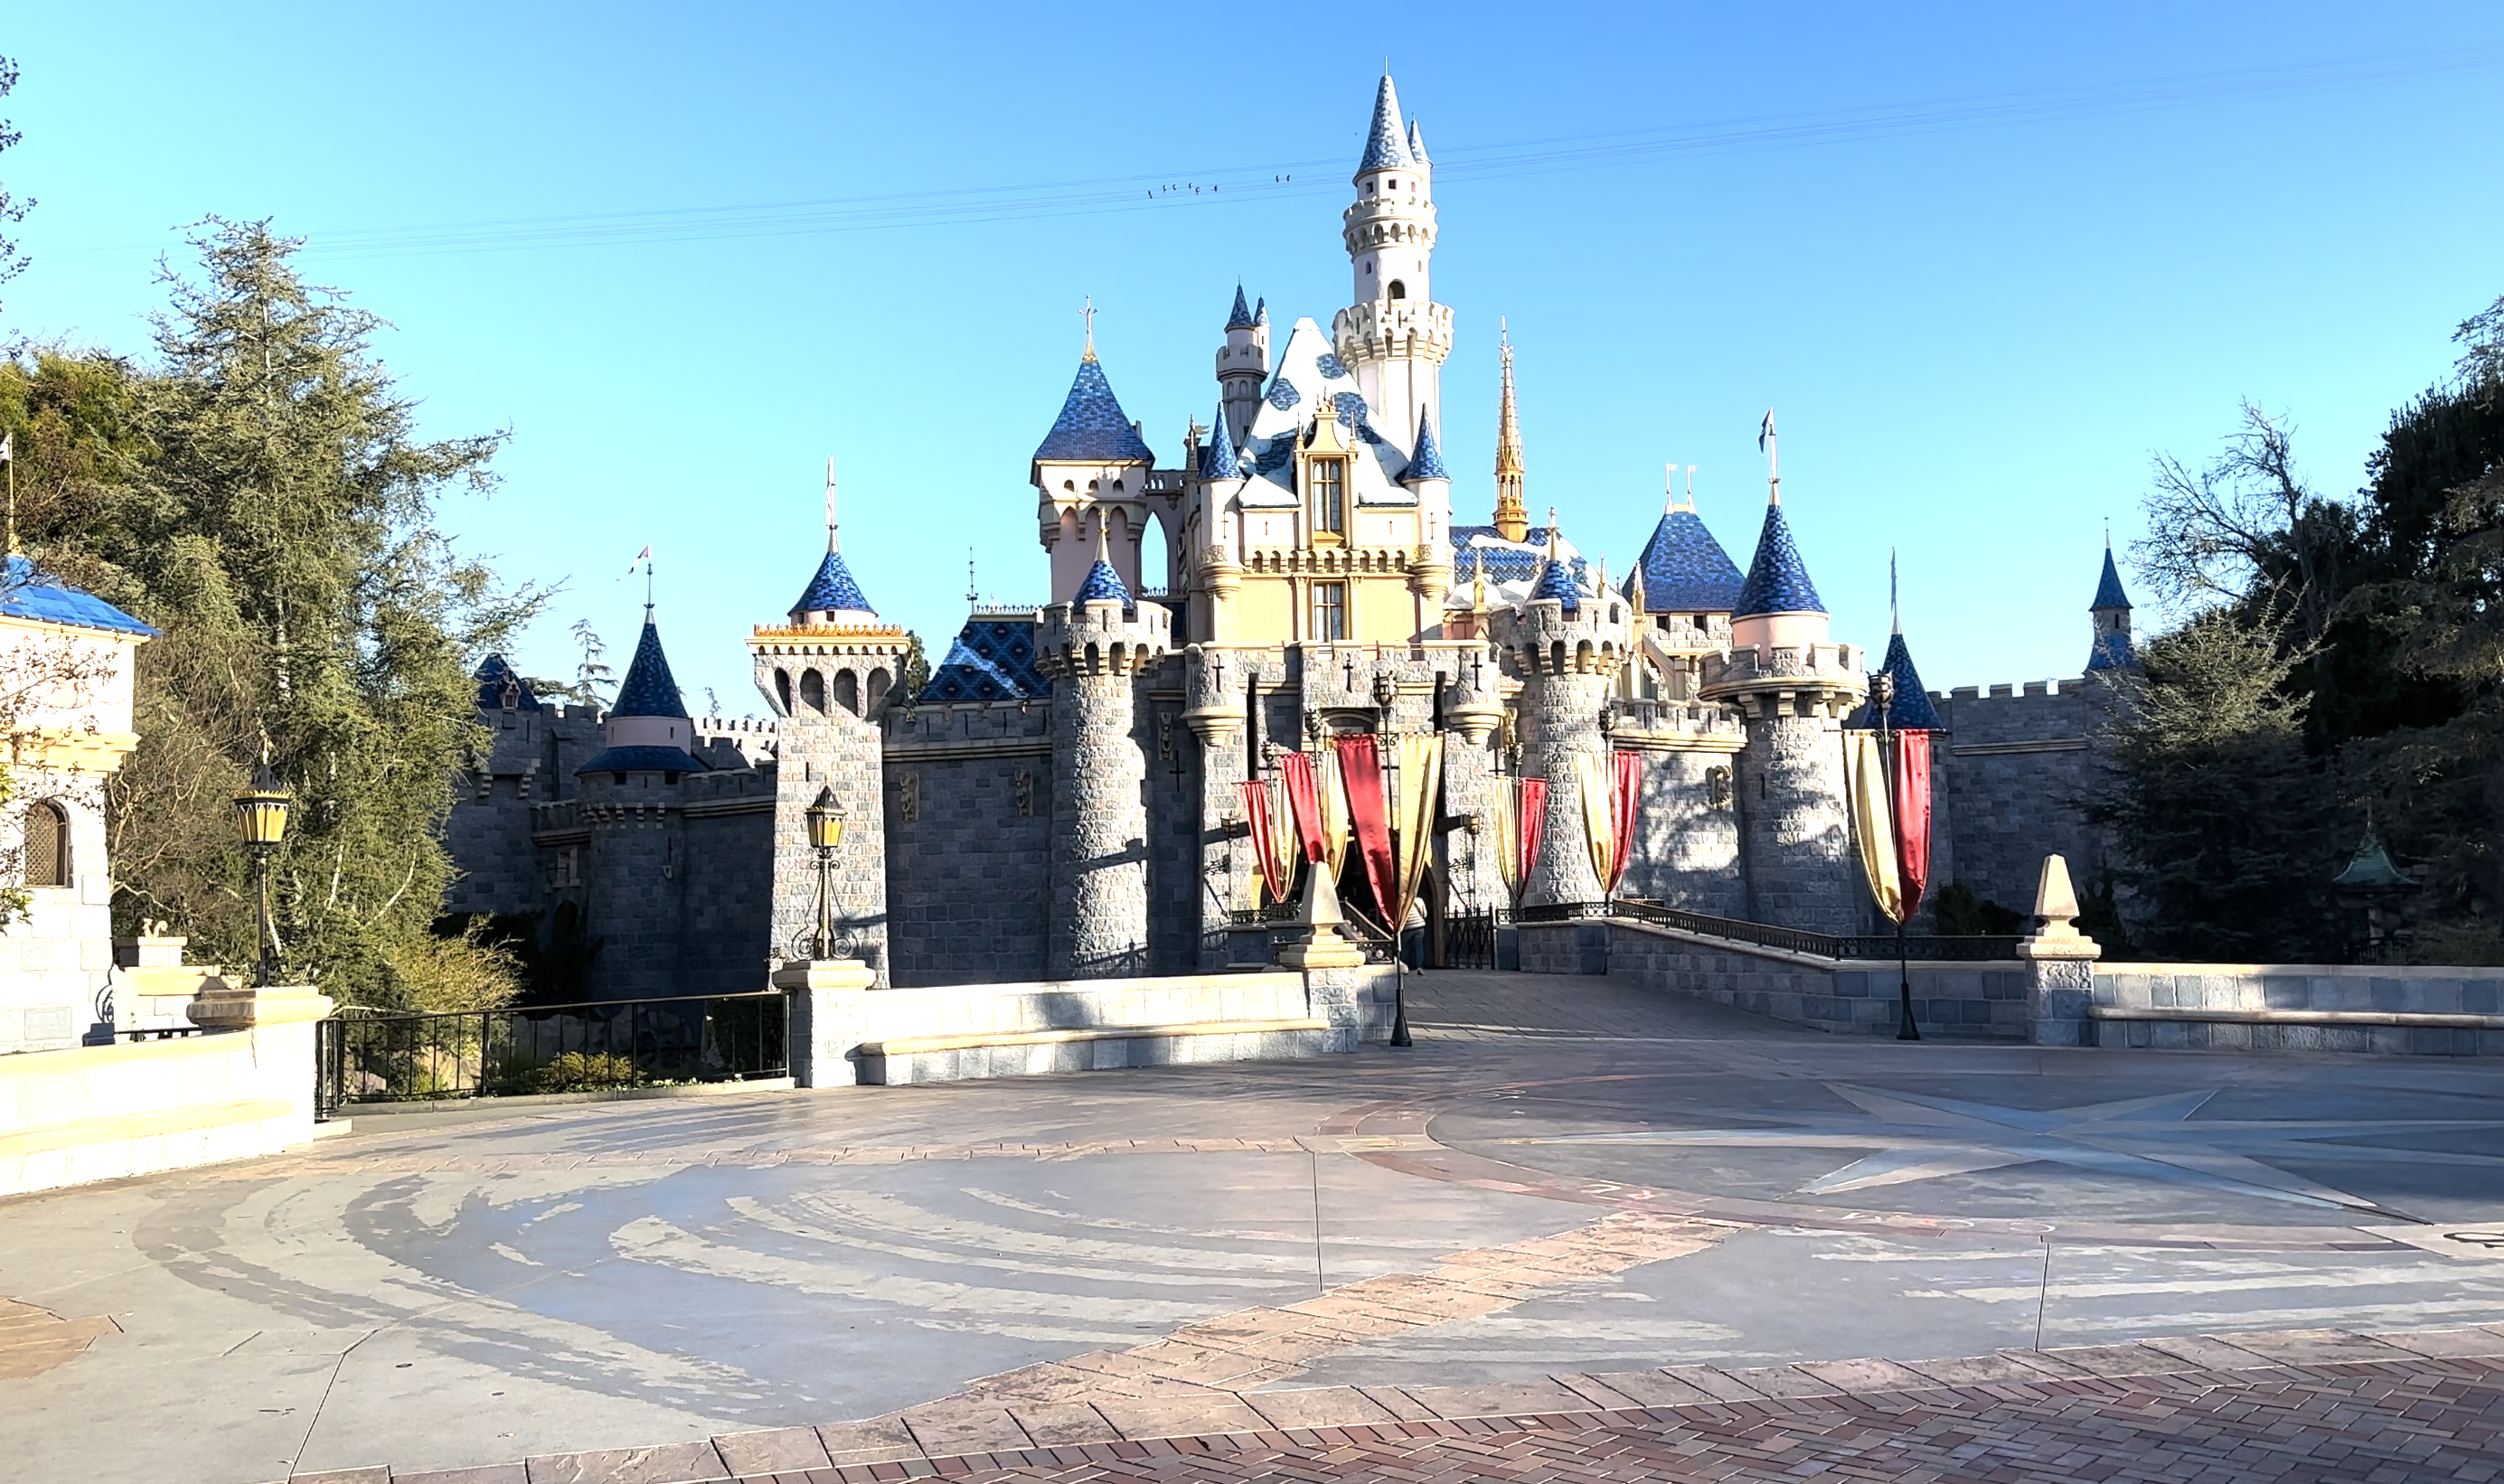 The Best 20 Attractions in Disneyland for Any Disney World Fan